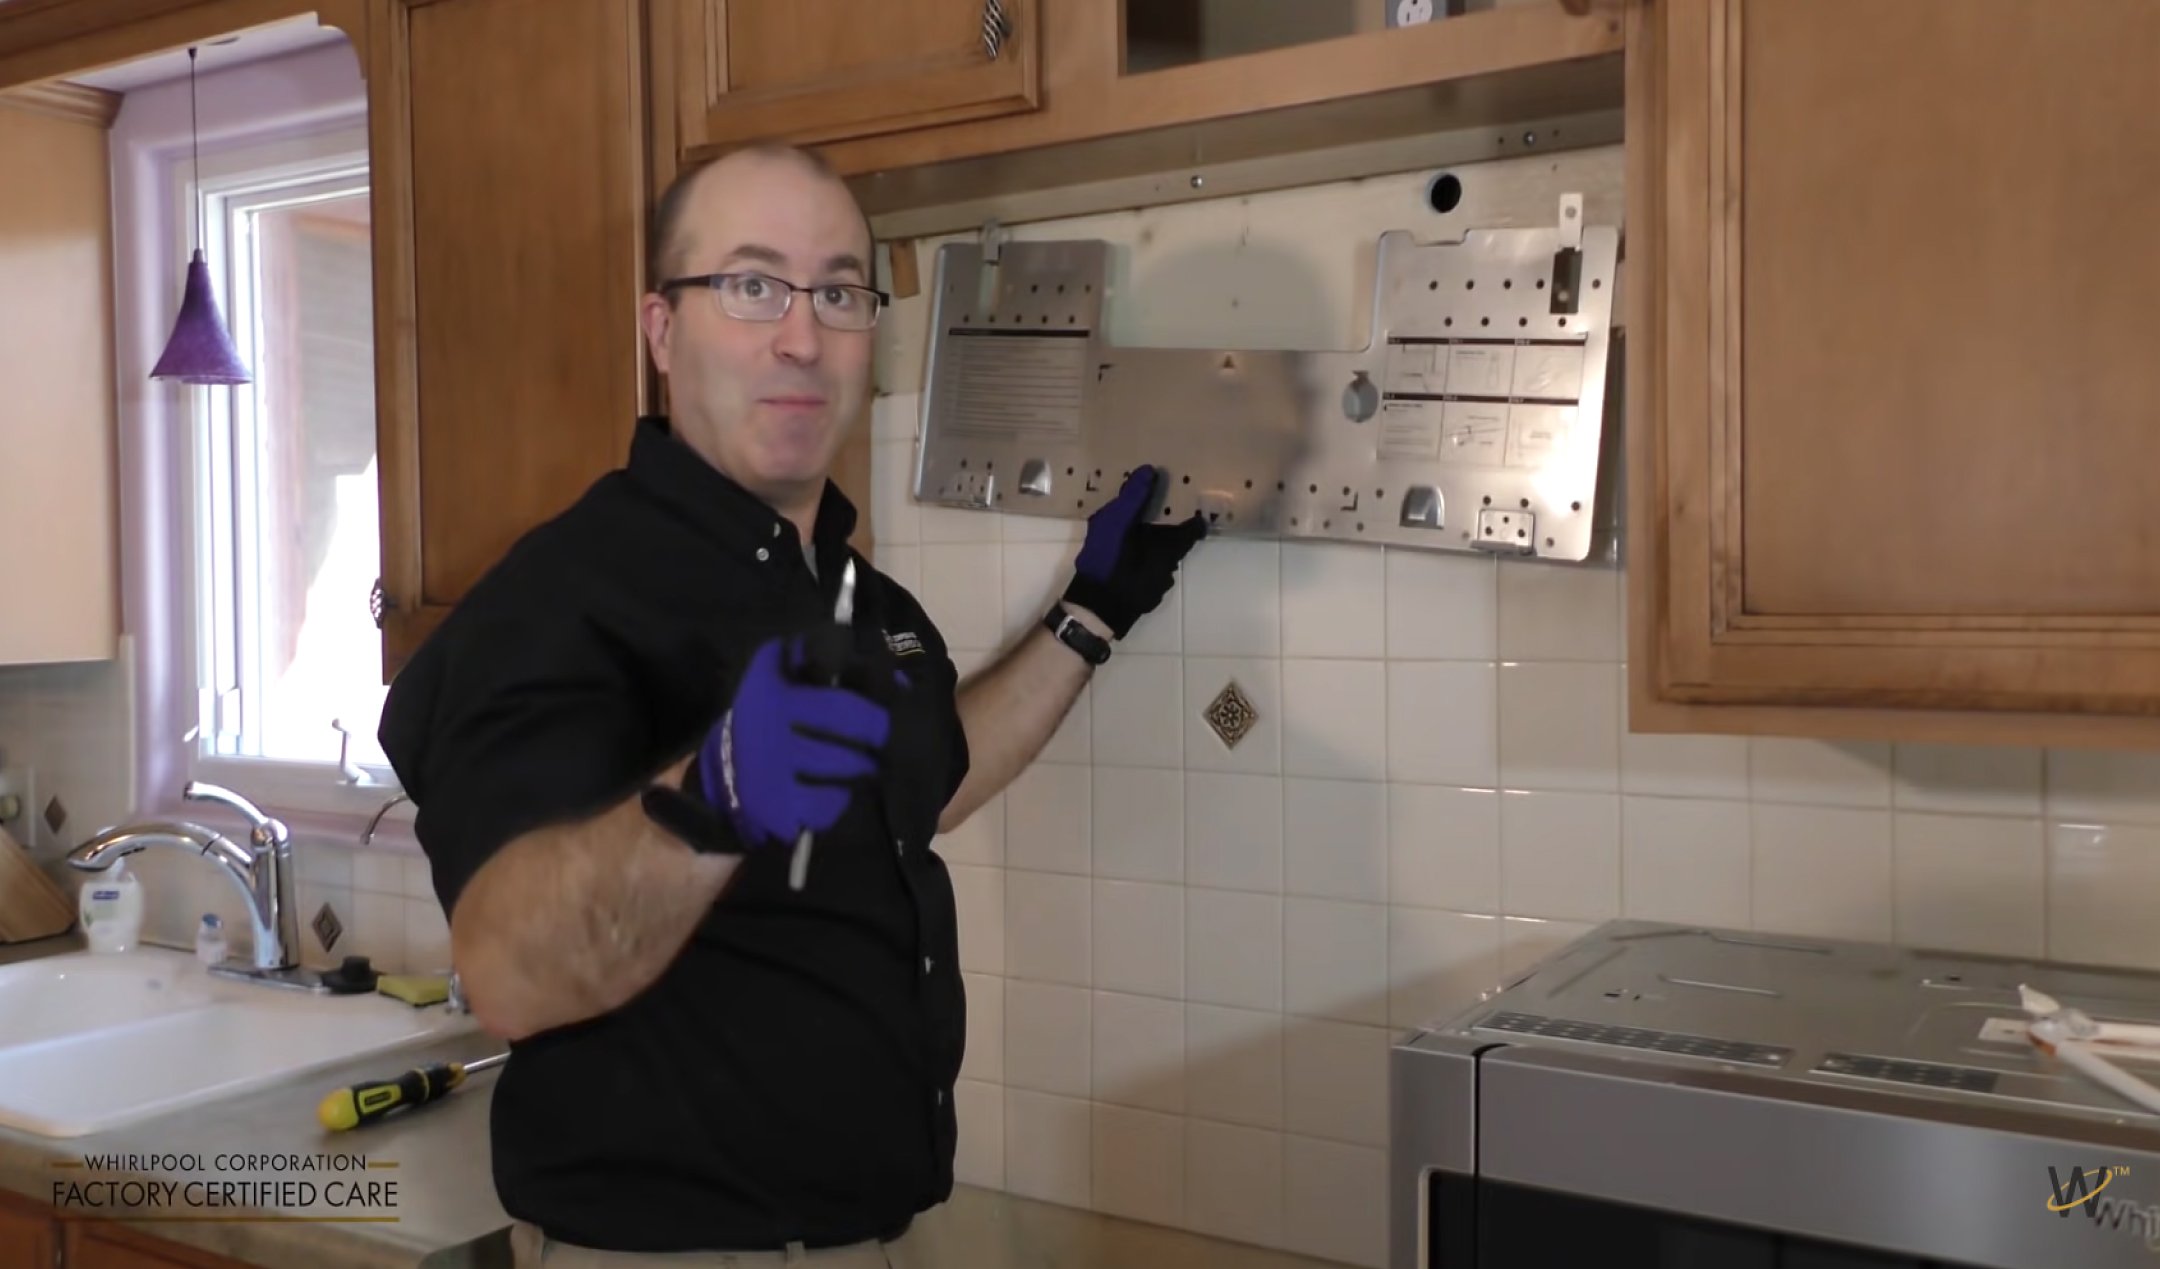 kitchens - How to place an OTR microwave next to a wall - Home Improvement  Stack Exchange